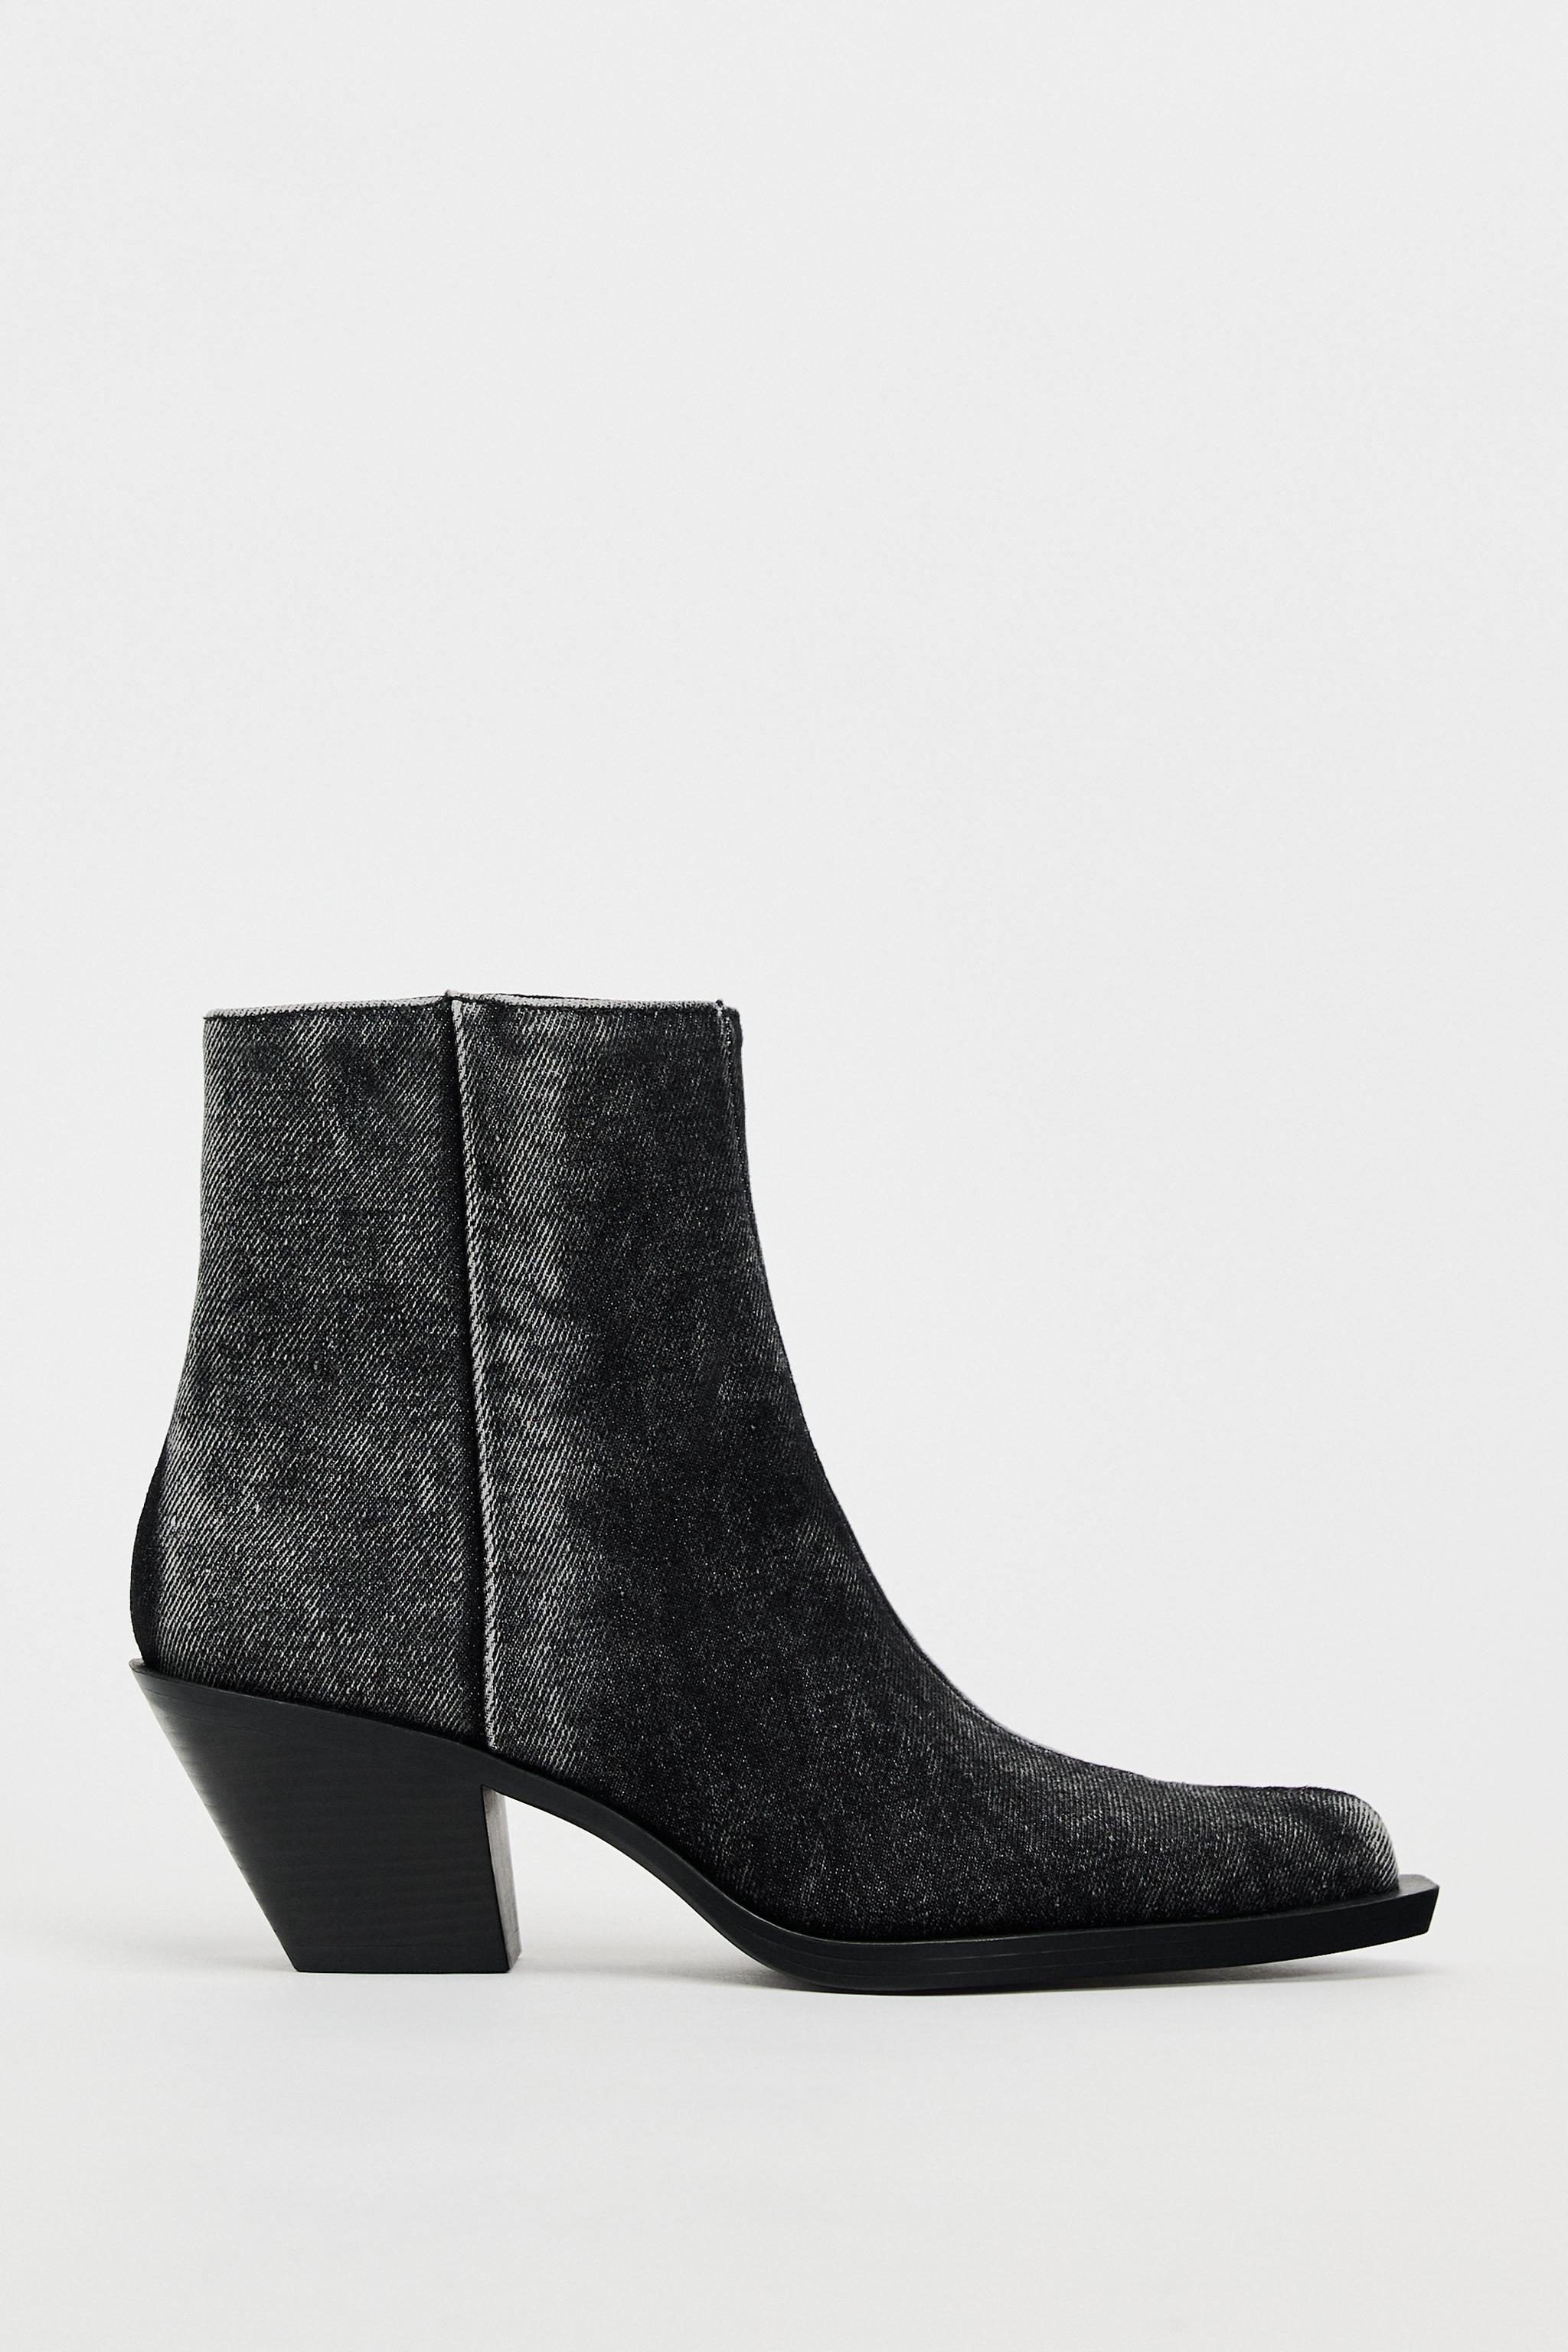 BUCKLED STRAP ANKLE BOOTS - Black